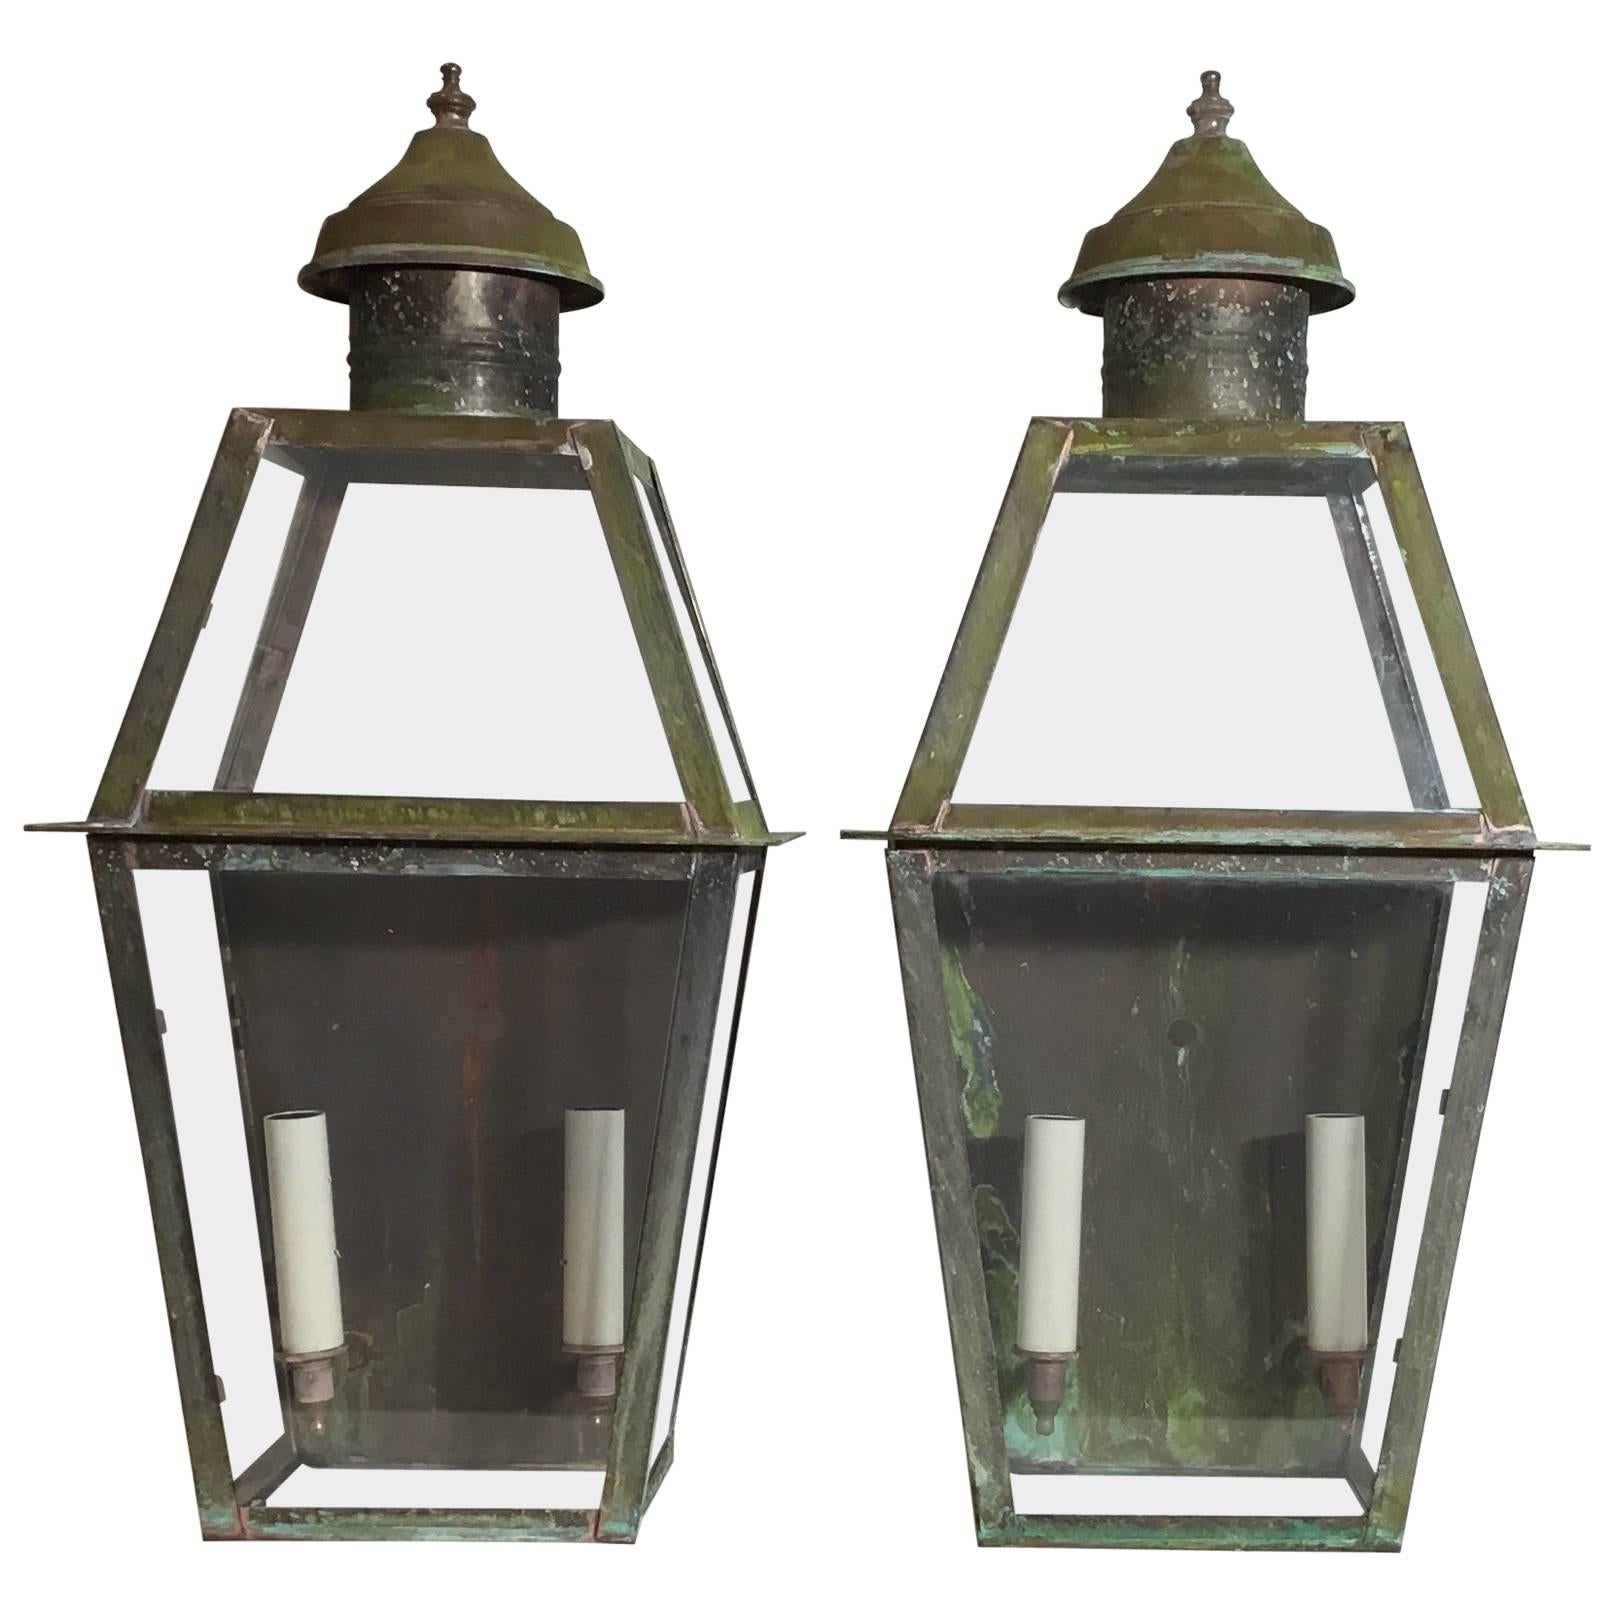 Pair of Large Architectural Wall Lanterns